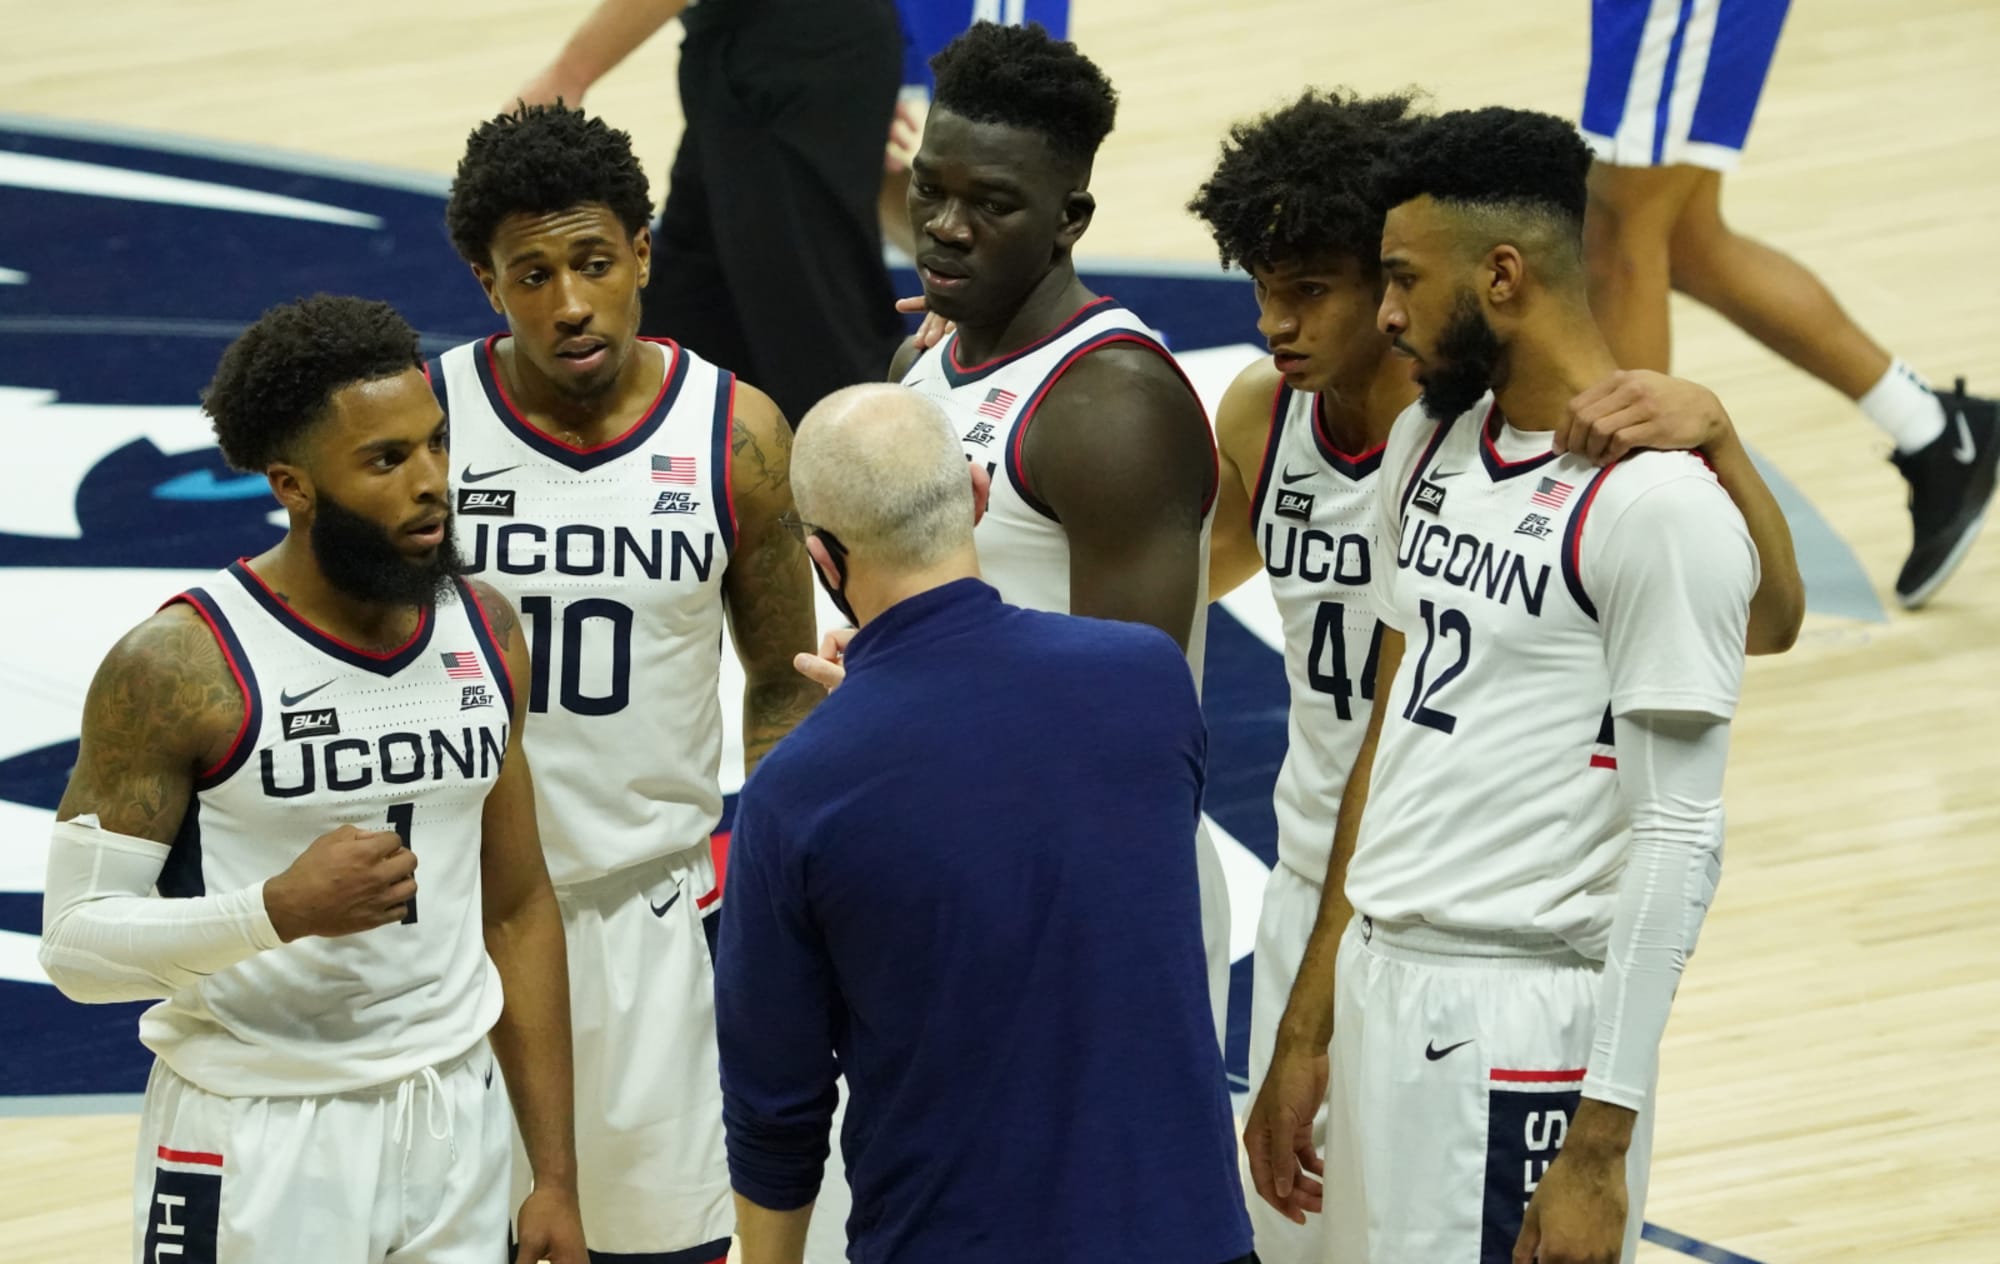 Coppin State vs UConn: 2021-22 basketball game preview, TV schedule